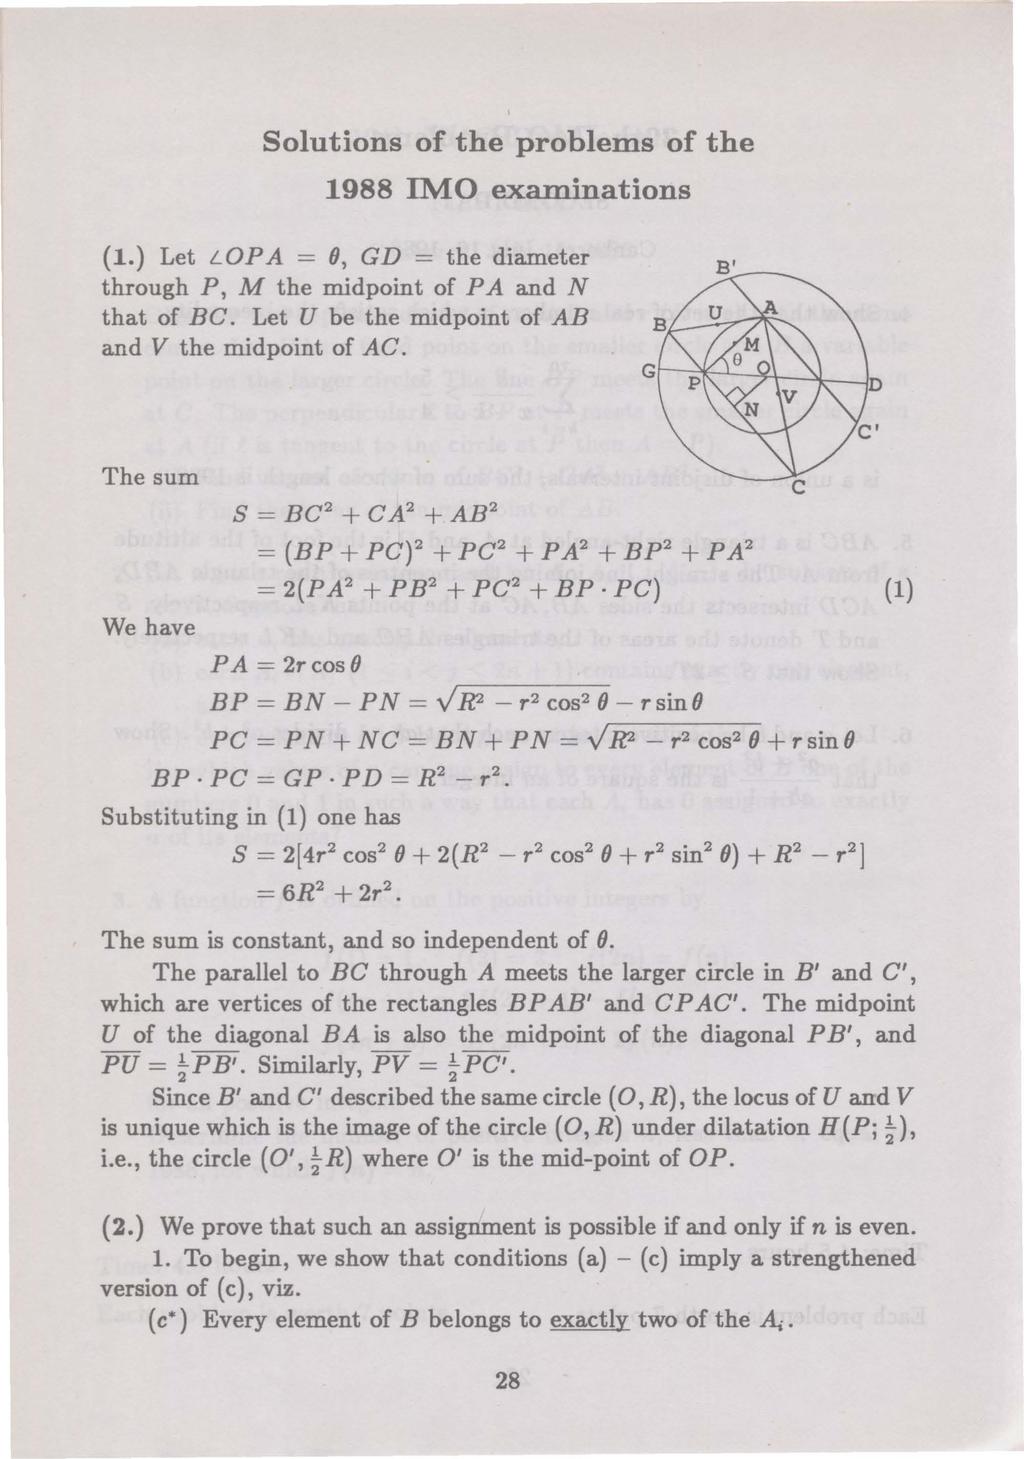 Solutions of the problems of the 1988 IMO examinations (1.) Let LOP A = 0, GD = the diameter through P, M the midpoint of P A and N that of BC. Let U be the midpoint of AB and V the midpoint of AC.